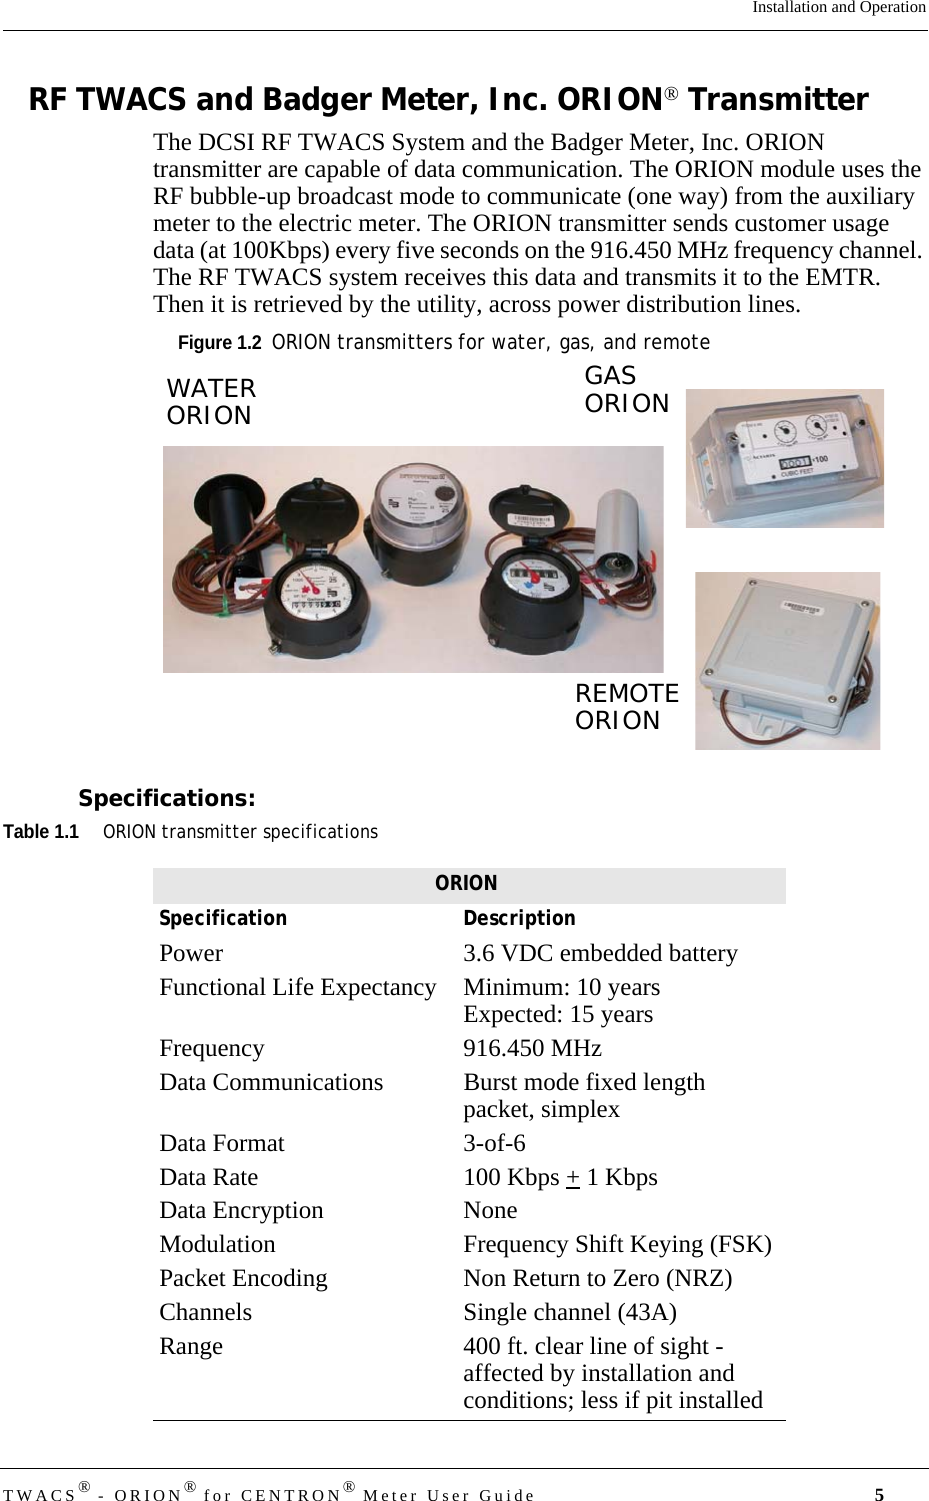 TWACS® - ORION® for CENTRON® Meter User Guide 5Installation and OperationRF TWACS and Badger Meter, Inc. ORION® TransmitterThe DCSI RF TWACS System and the Badger Meter, Inc. ORION transmitter are capable of data communication. The ORION module uses the RF bubble-up broadcast mode to communicate (one way) from the auxiliary meter to the electric meter. The ORION transmitter sends customer usage data (at 100Kbps) every five seconds on the 916.450 MHz frequency channel. The RF TWACS system receives this data and transmits it to the EMTR. Then it is retrieved by the utility, across power distribution lines.Figure 1.2  ORION transmitters for water, gas, and remoteSpecifications:Table 1.1ORION transmitter specificationsREMOTEORIONGASORIONWATERORIONORIONSpecification DescriptionPower 3.6 VDC embedded batteryFunctional Life Expectancy  Minimum: 10 yearsExpected: 15 yearsFrequency 916.450 MHzData Communications  Burst mode fixed length packet, simplexData Format  3-of-6Data Rate  100 Kbps + 1 KbpsData Encryption  NoneModulation  Frequency Shift Keying (FSK)Packet Encoding  Non Return to Zero (NRZ)Channels  Single channel (43A)Range  400 ft. clear line of sight - affected by installation and conditions; less if pit installed